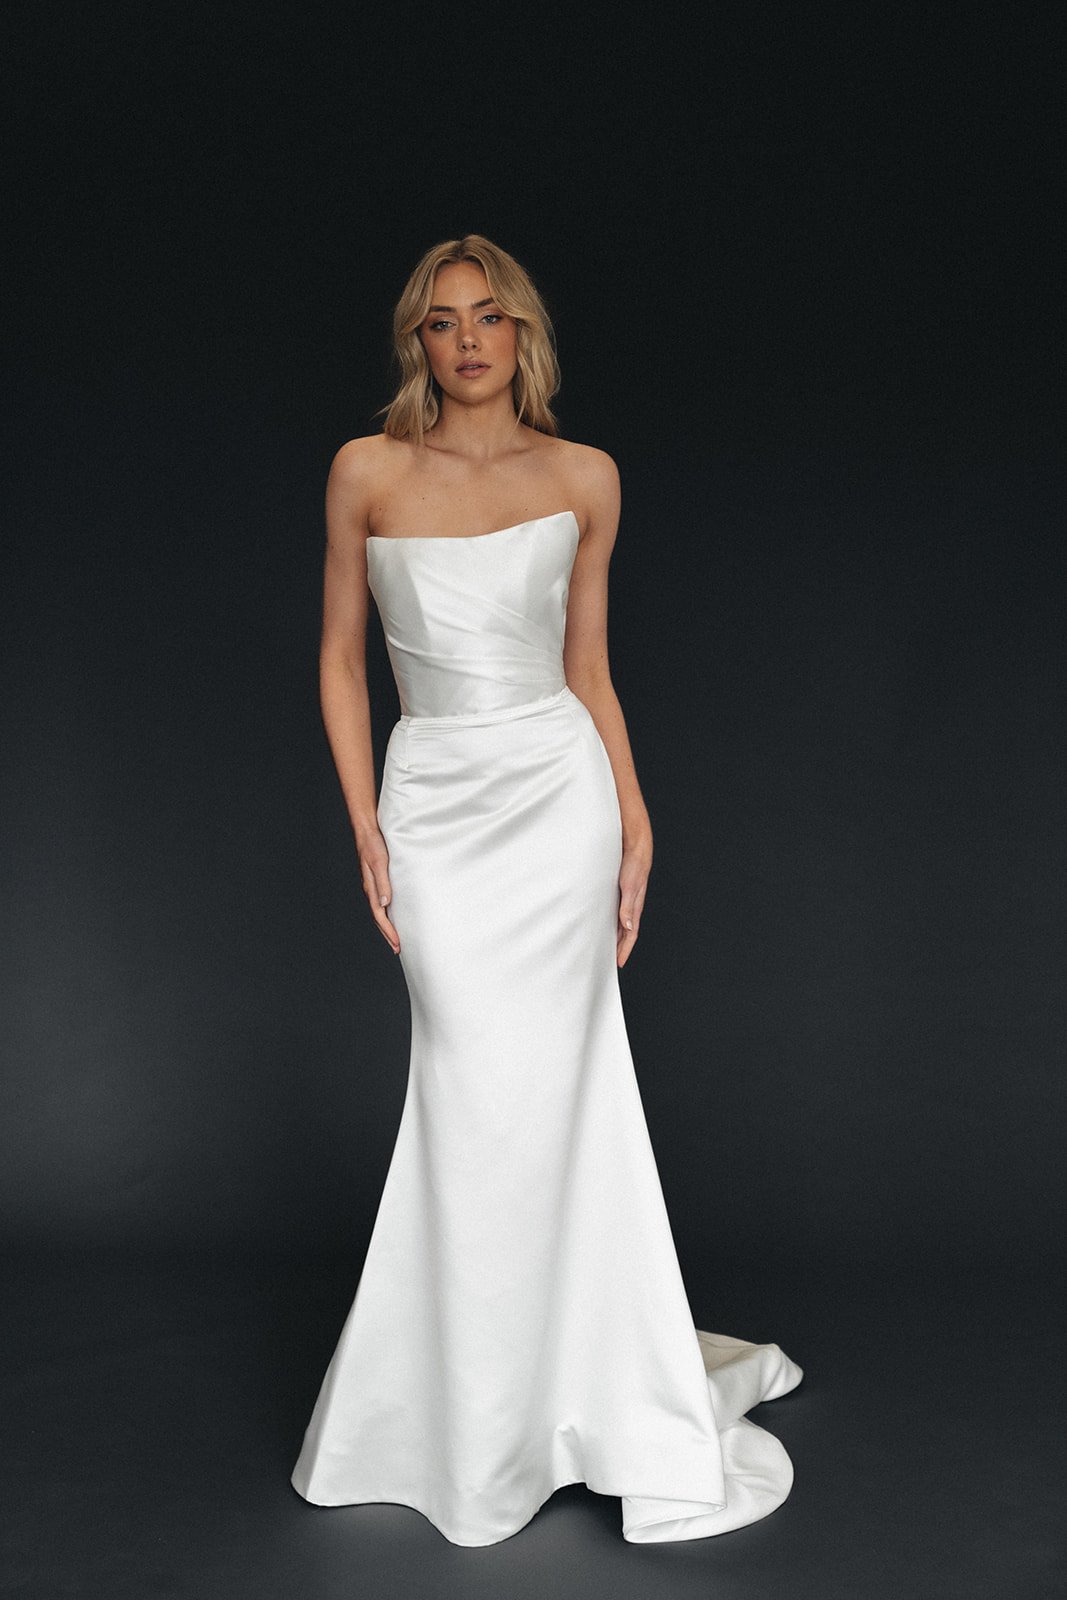 Moira Hughes Take Flight Collection The Rome Strapless Wedding Gown in Duchess Satin.jpg